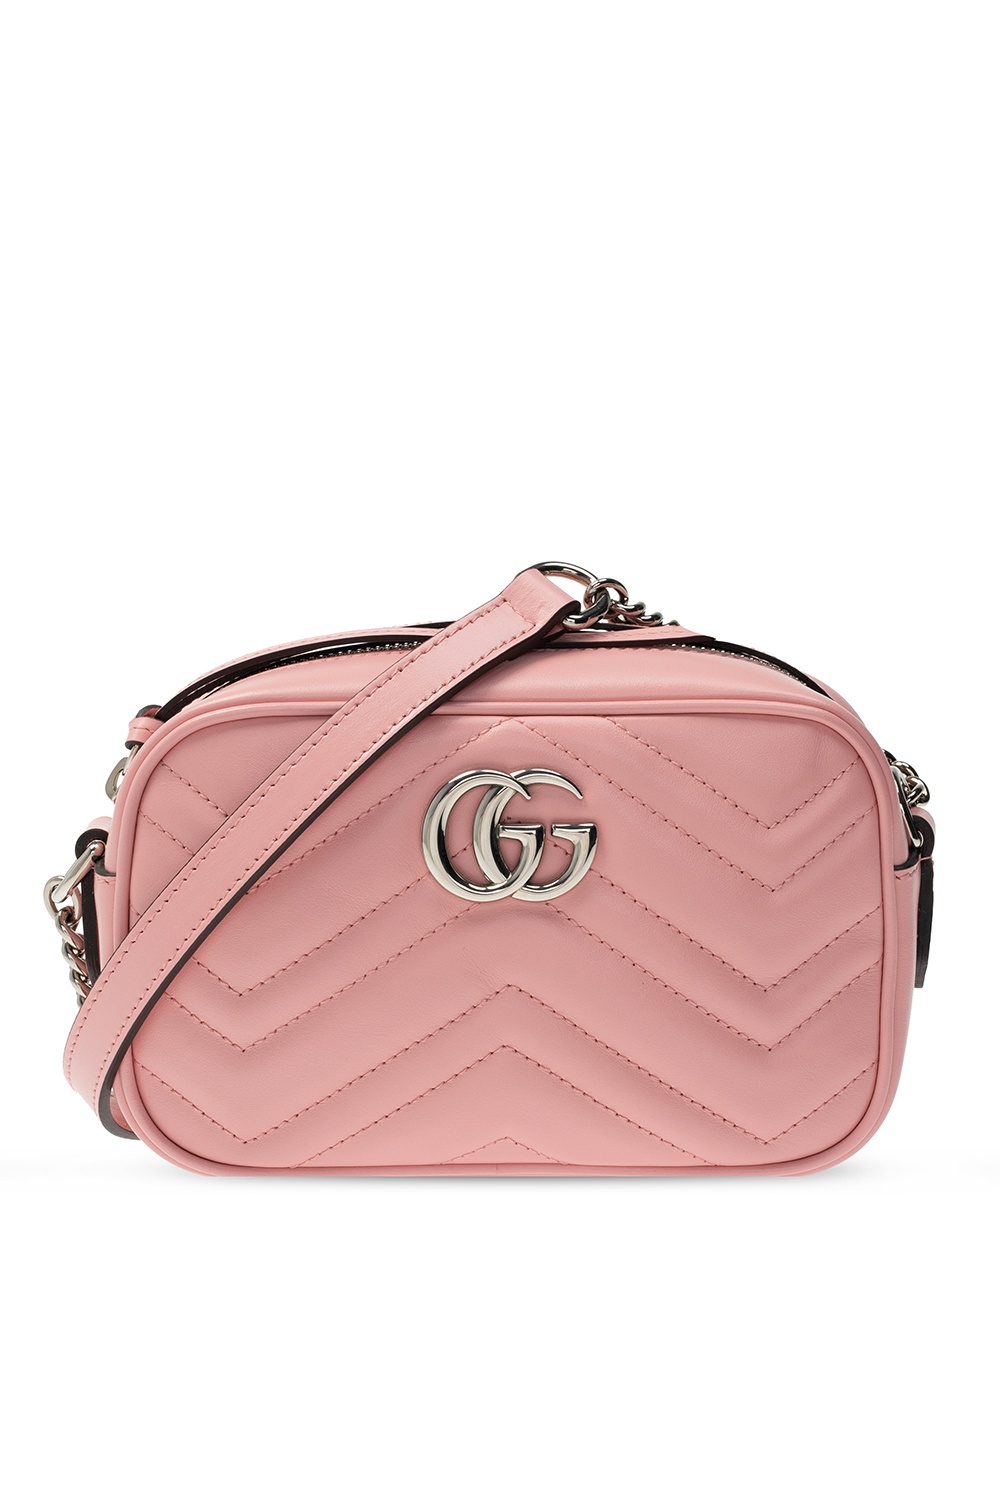 gucci Sac ‘GG Marmont’ quilted shoulder bag